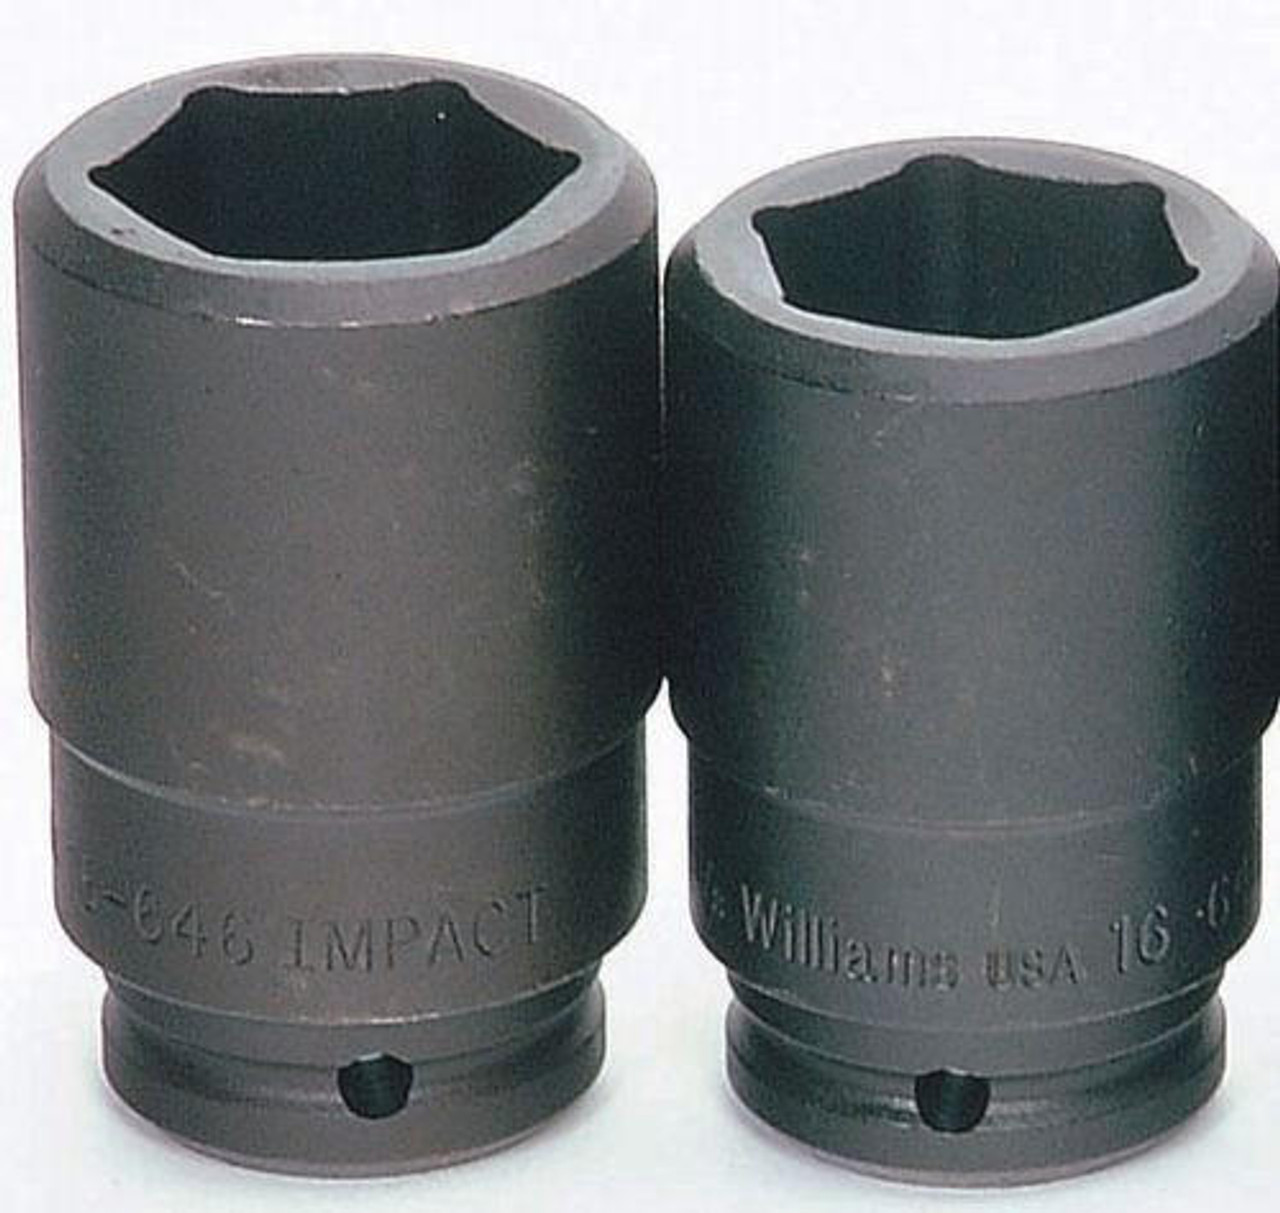 Williams Made In USA 1 11/16" Williams 3/4" Dr Deep Impact Socket 6 Pt - 16-654 